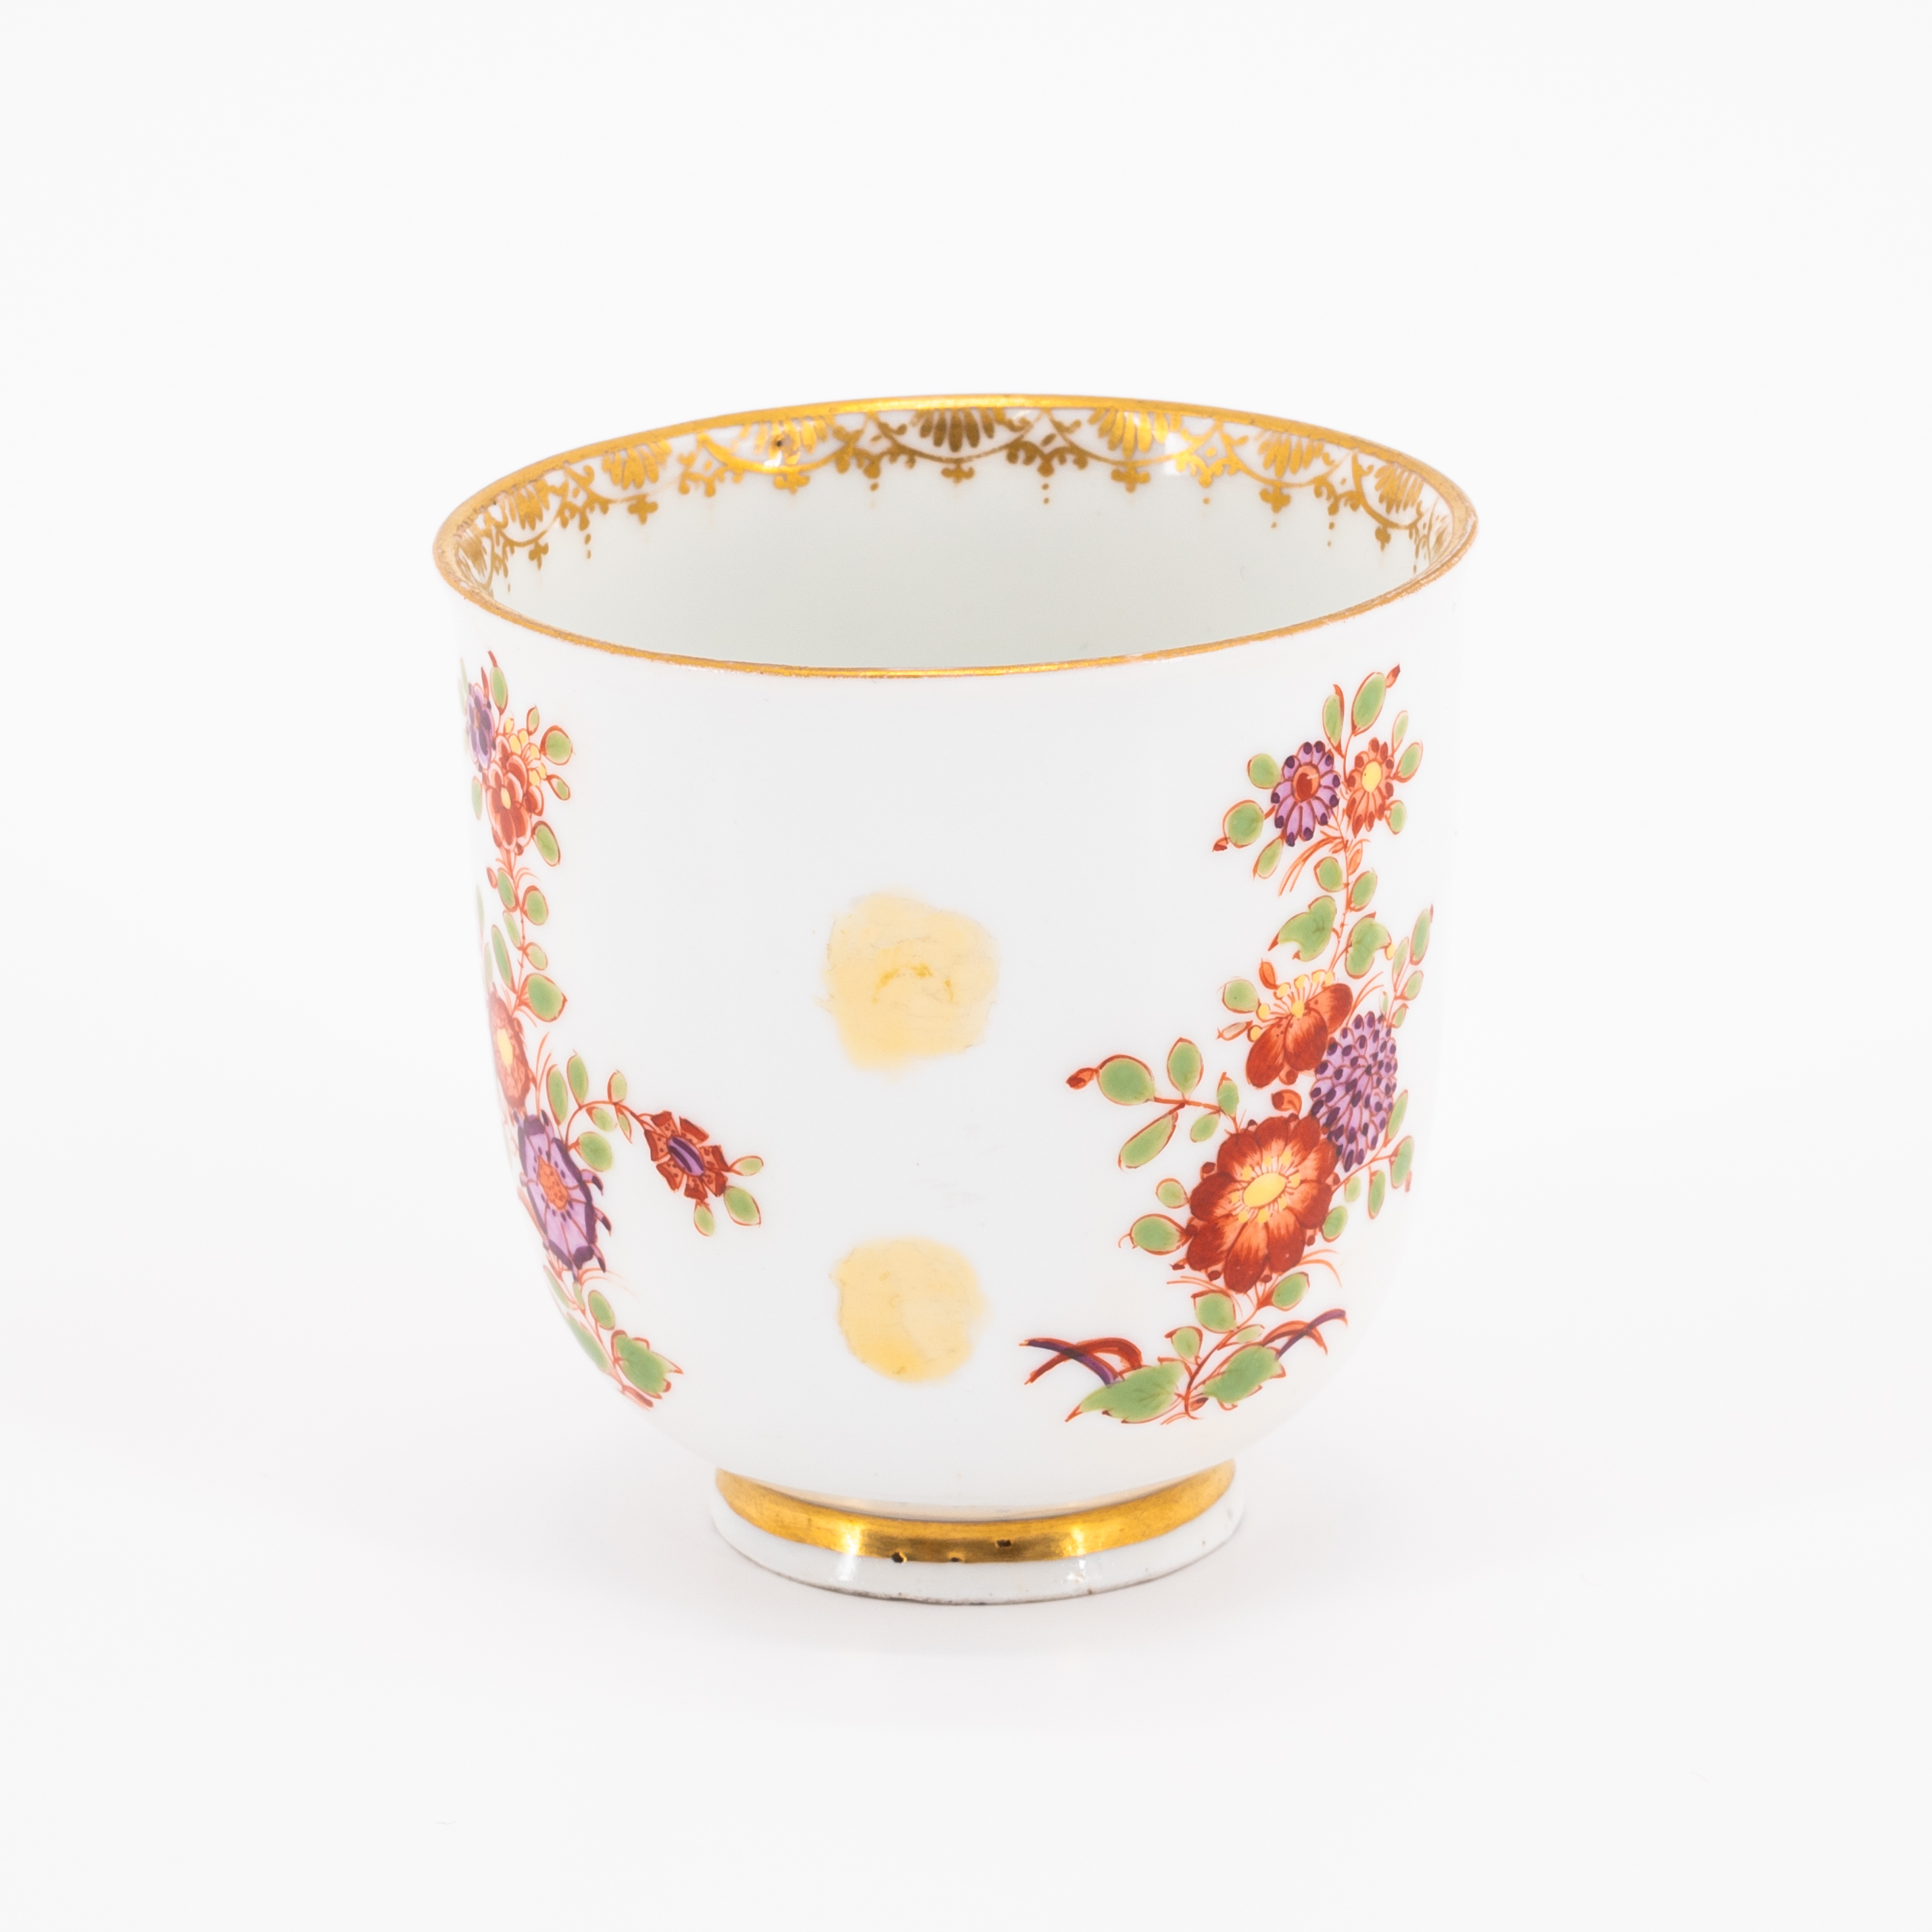 PORCELAIN CUP WITH CHINOISERIES AND 'INDIAN' FLOWERS - Image 3 of 6